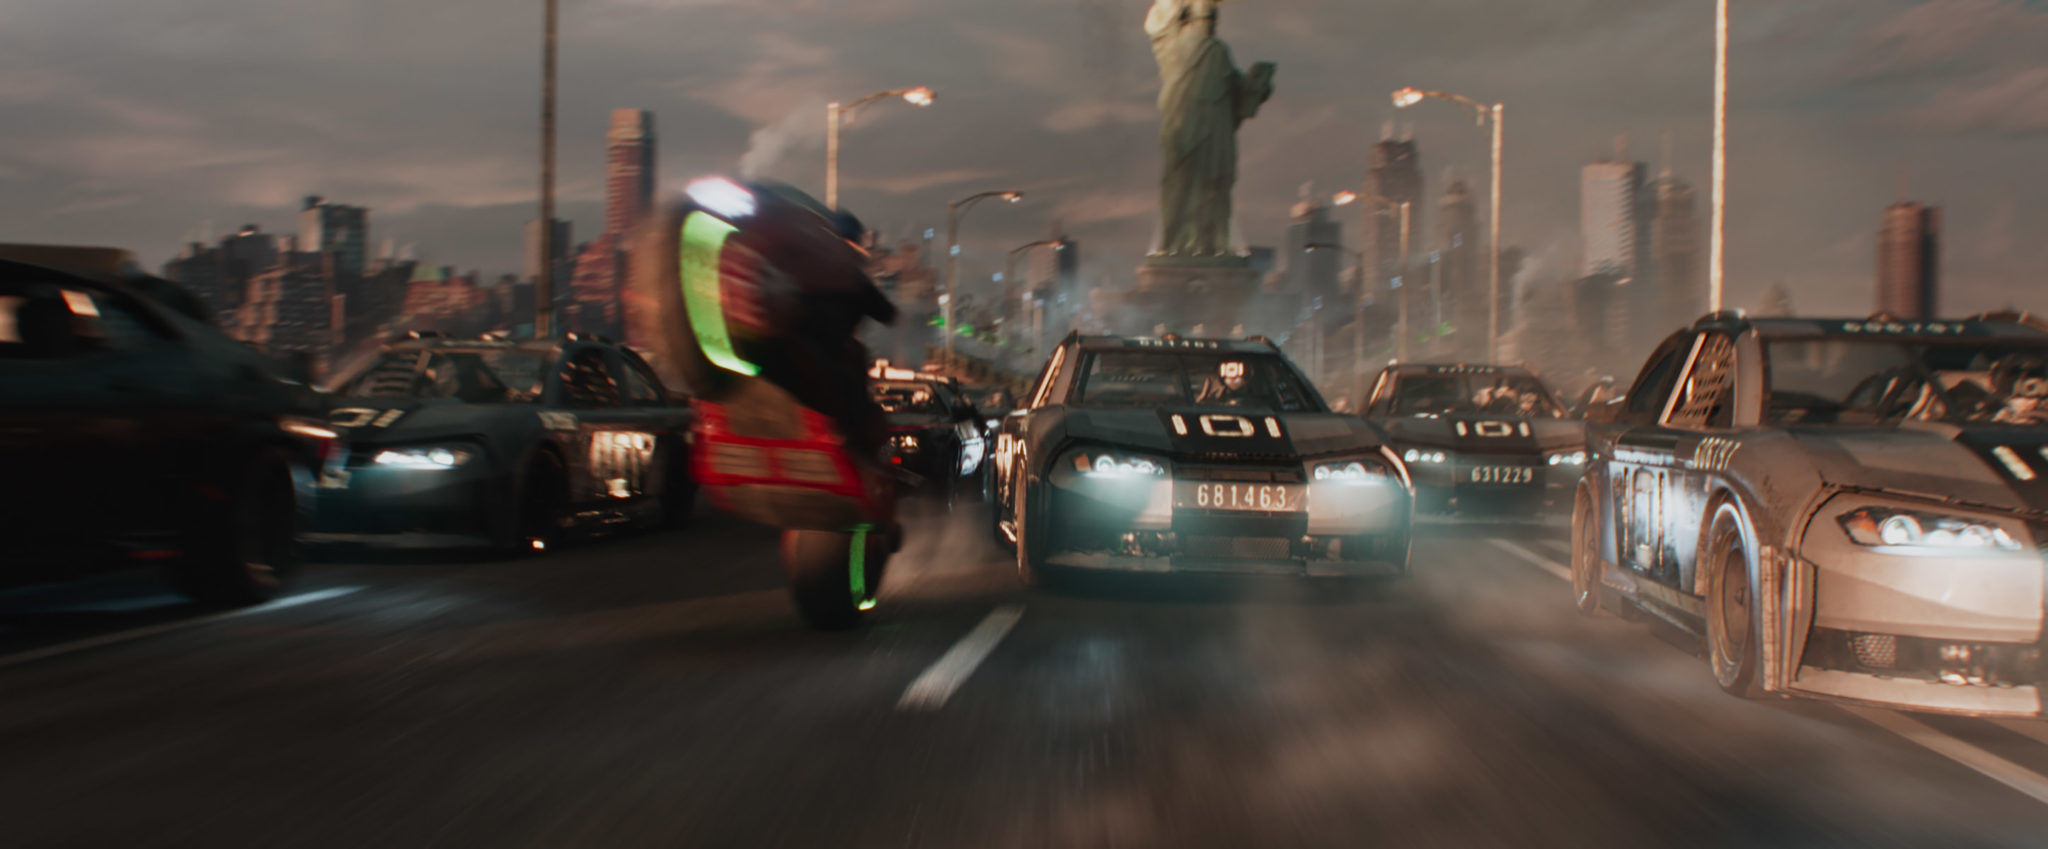 <i>Ready Player One</i>'s New York race